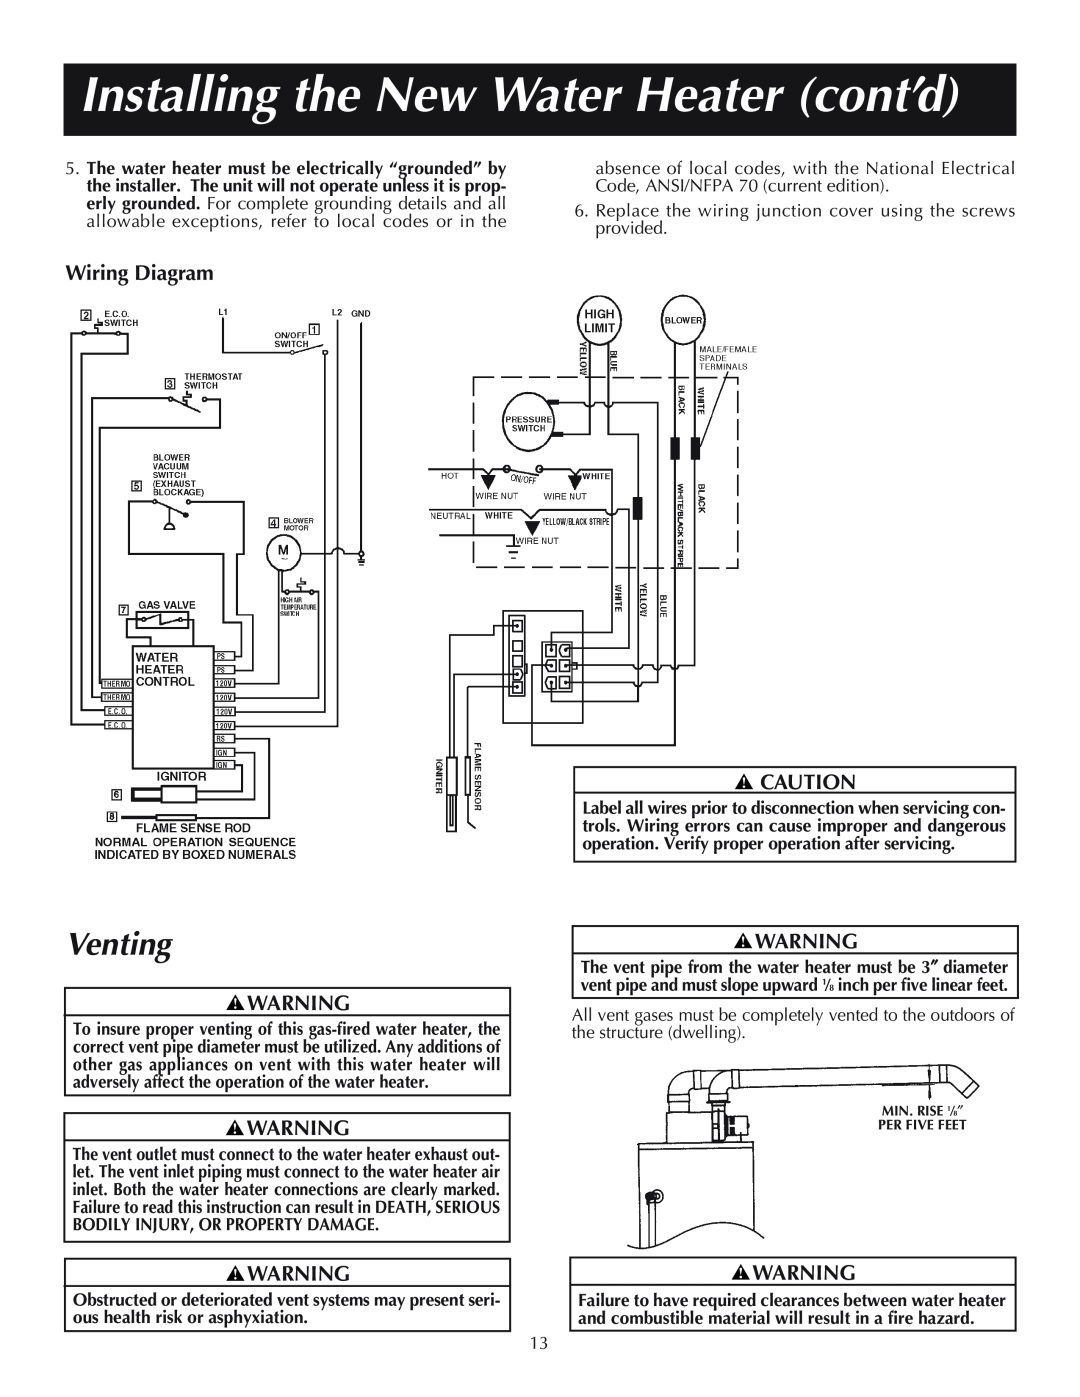 Reliance Water Heaters 11-03, 606, 184333-001 Venting, Installing the New Water Heater cont’d, Wiring Diagram 